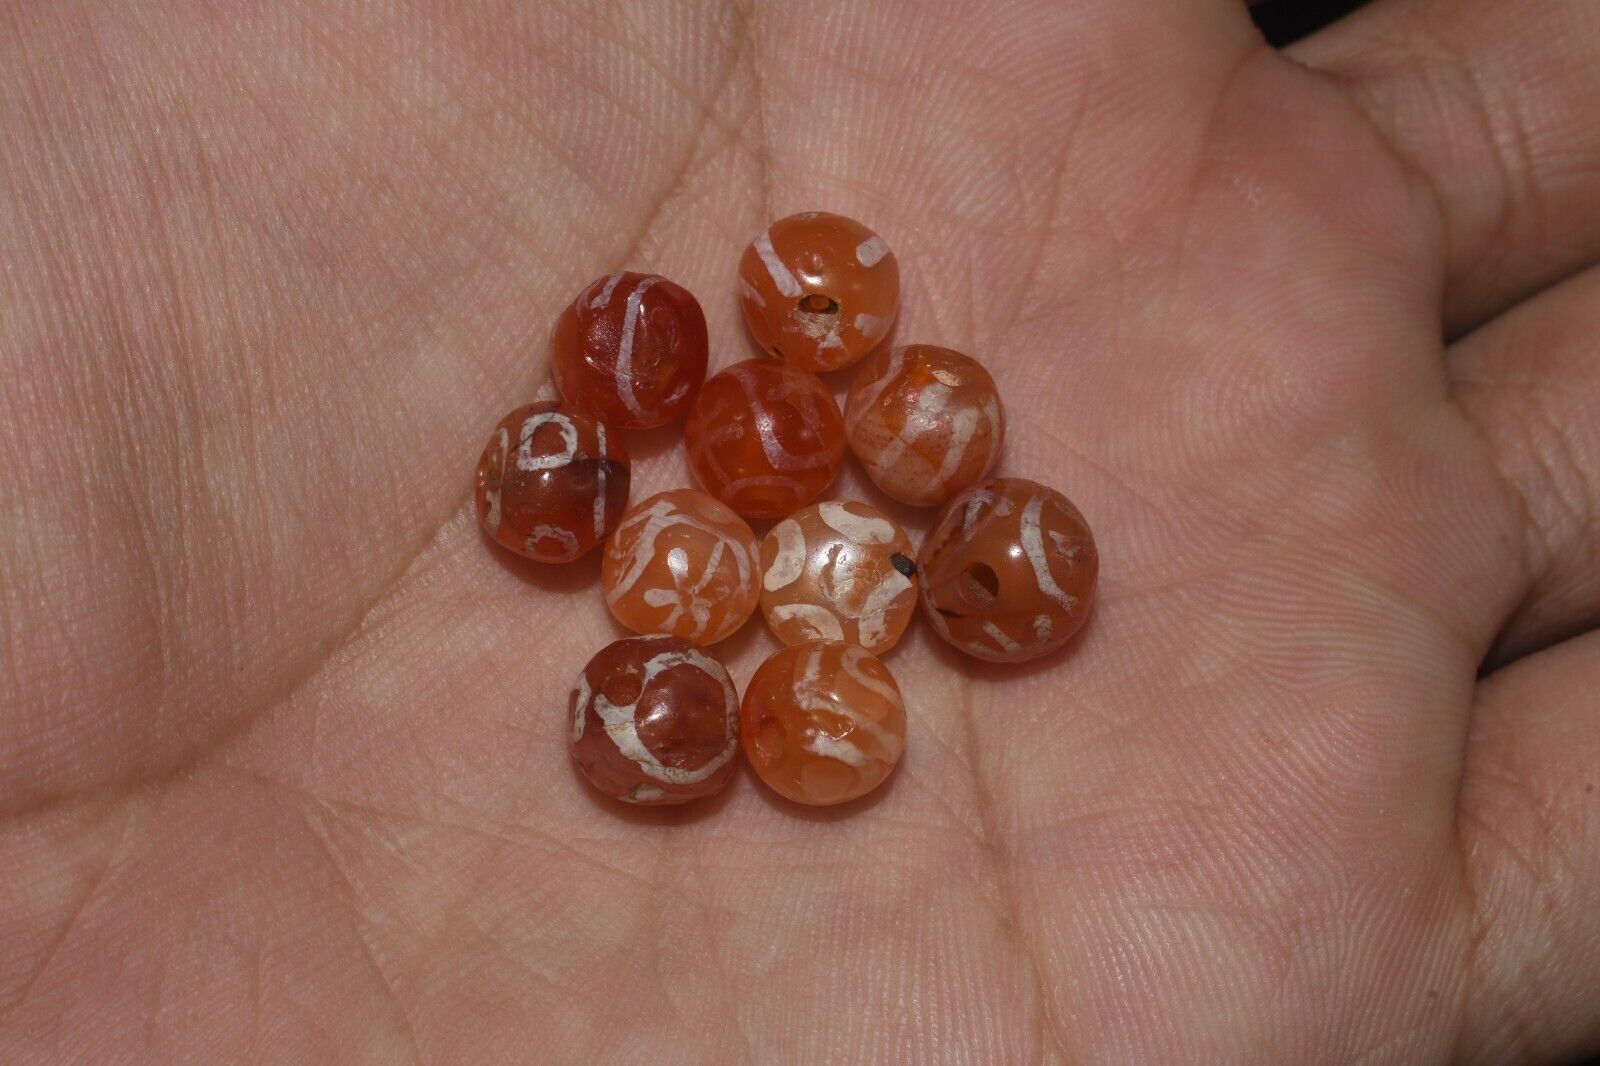 Authentic 10 Ancient Indus Valley Etched Round Carnelian Beads Ca. 2600-1700 BCE Без бренда - фотография #5